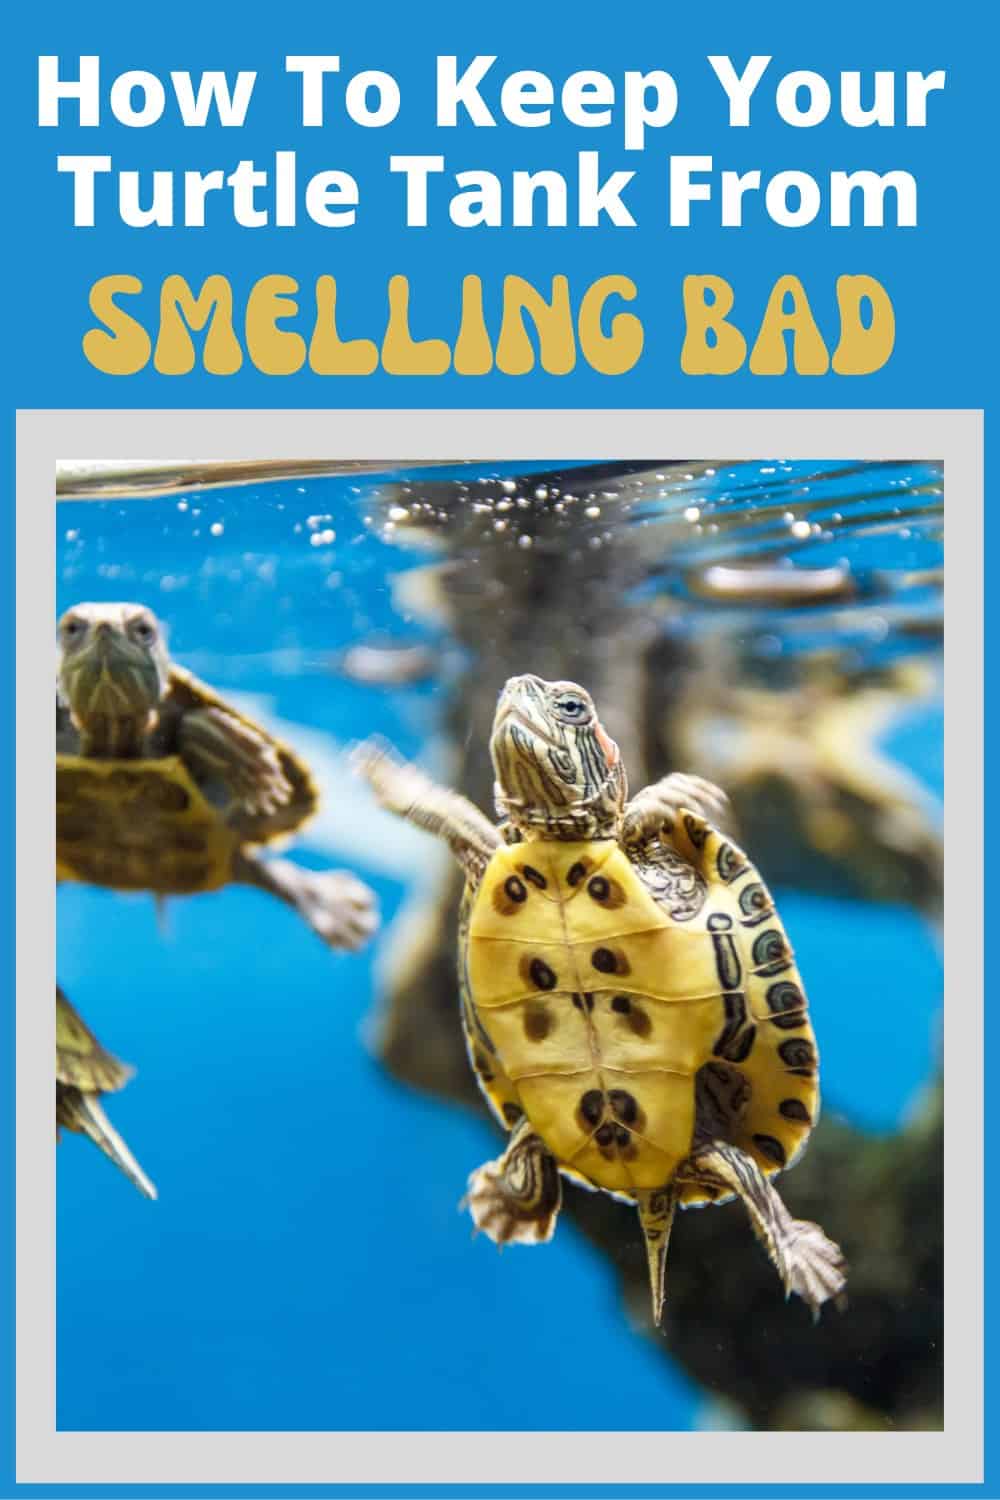 Why Do Turtle Tanks Smell Bad?